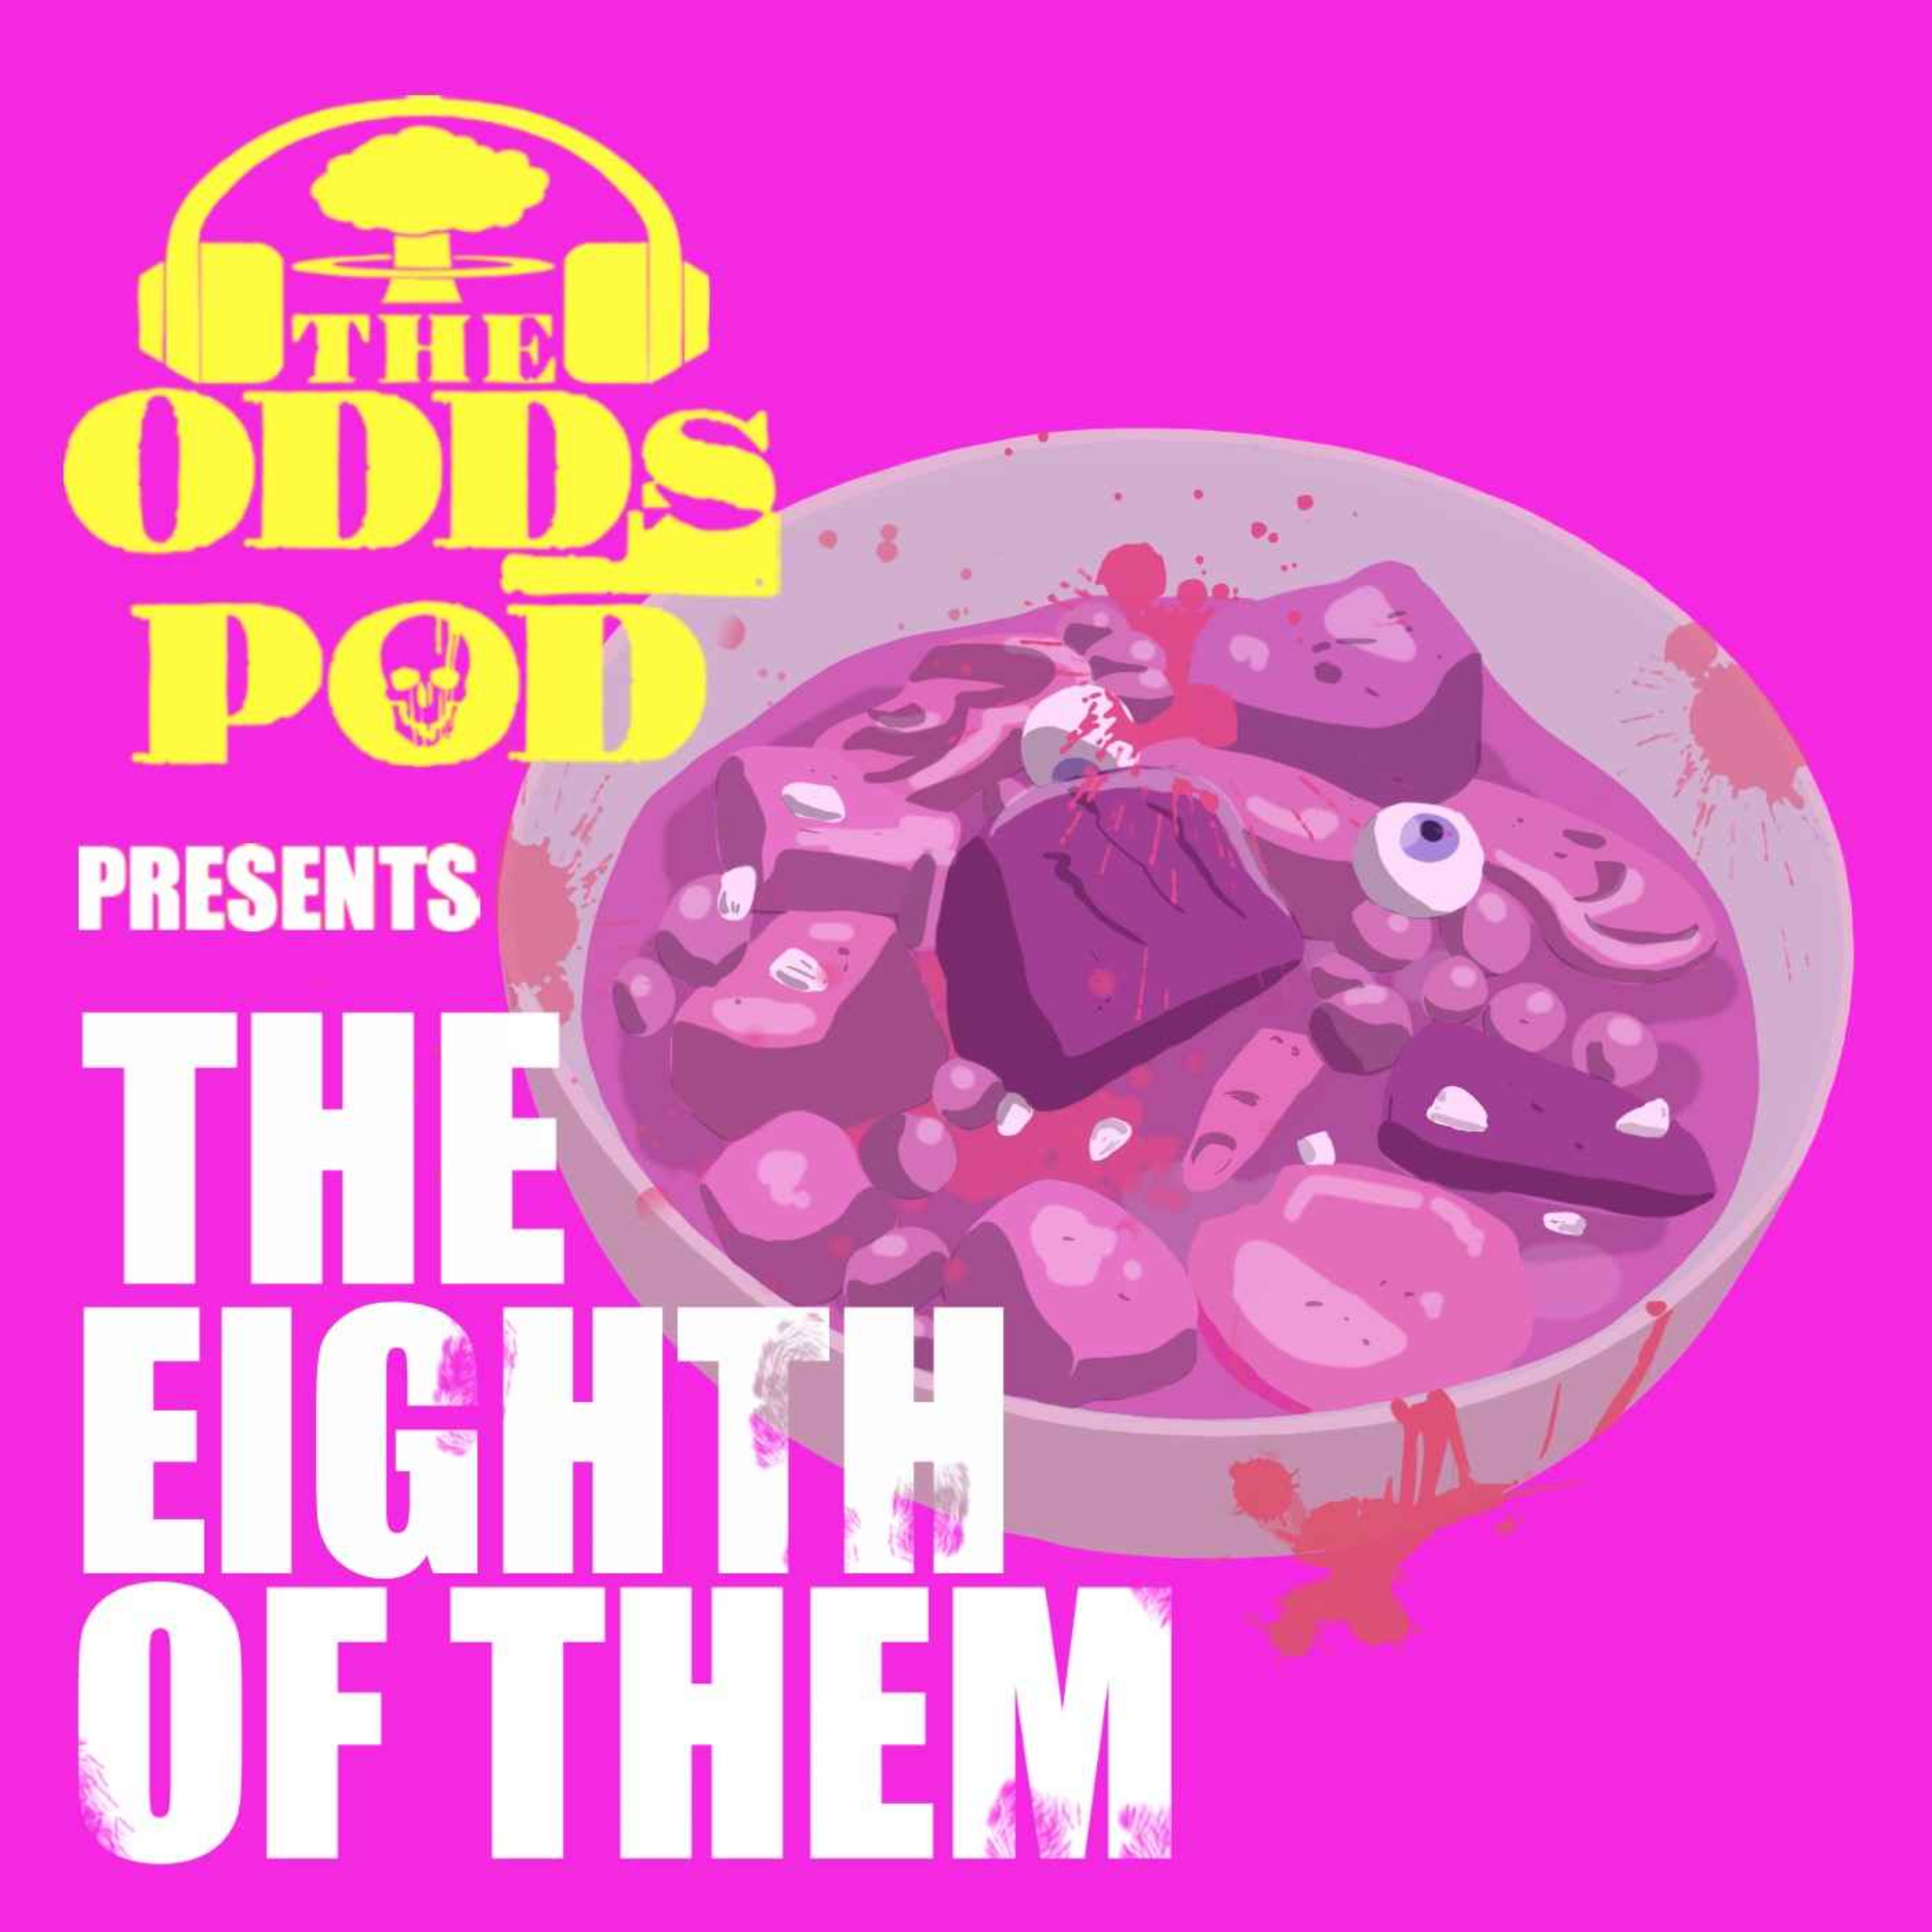 The Odds Pod Presents - The Eighth of Them